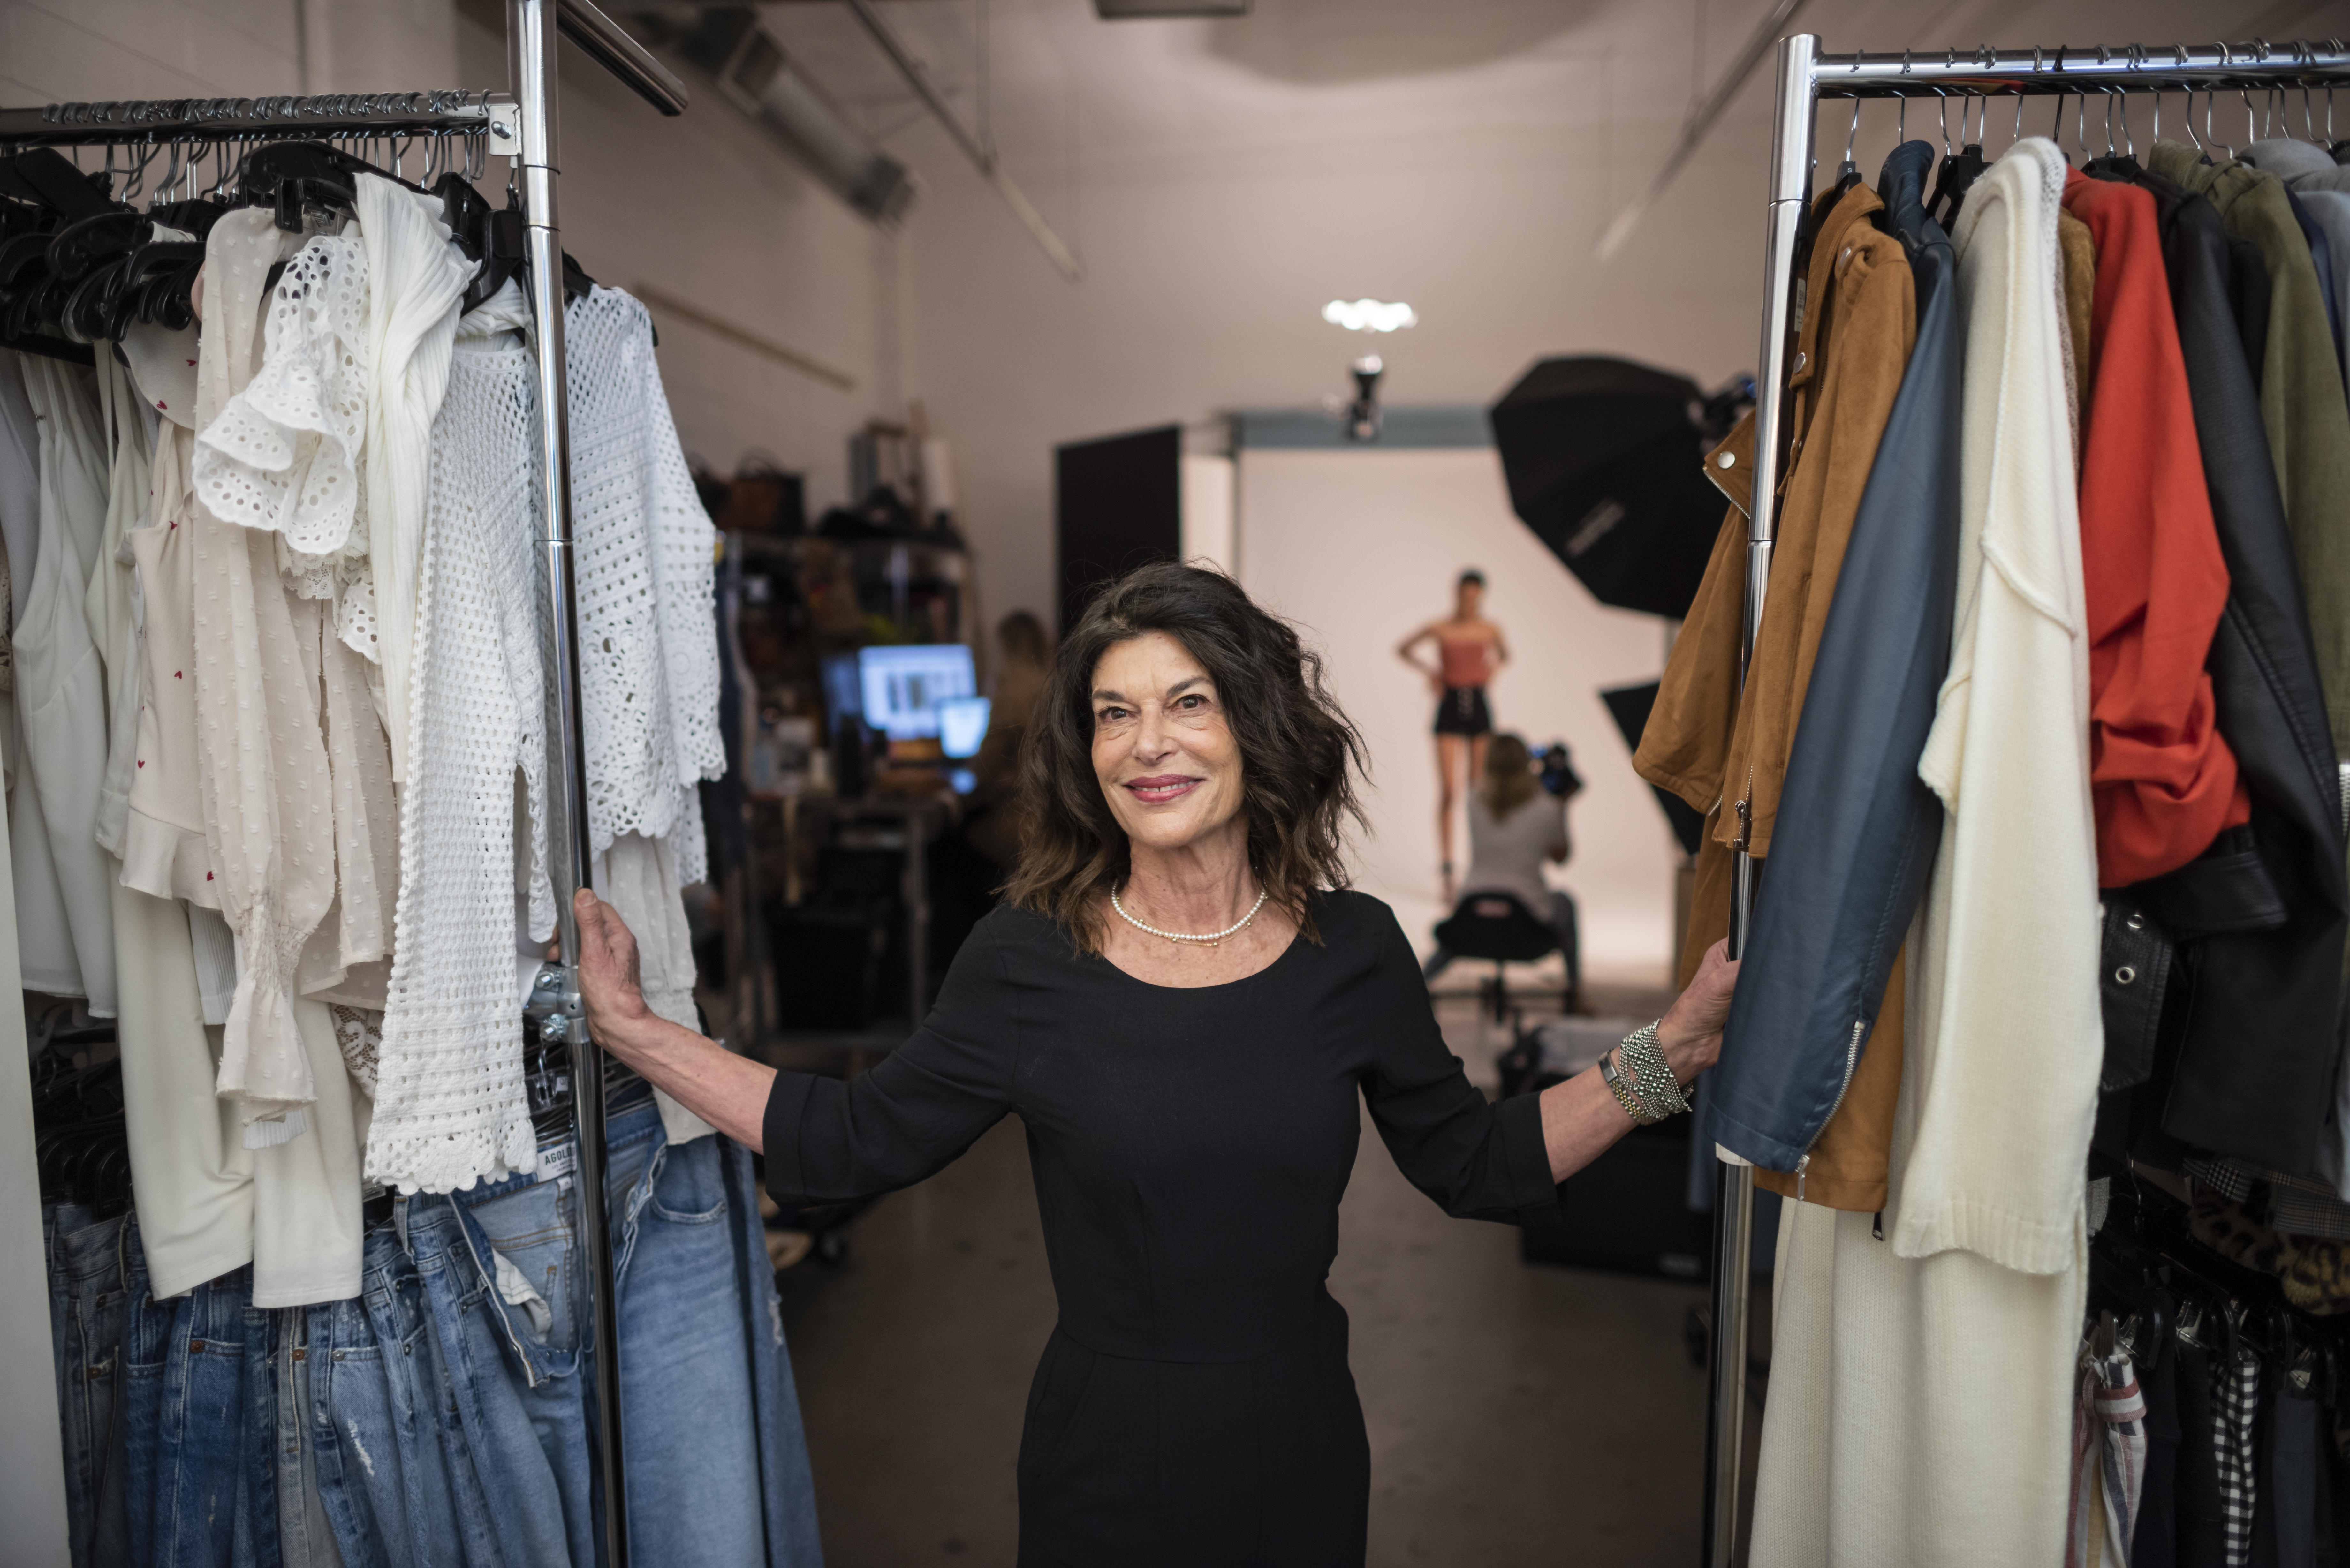 Debra Cannon stands between clothing racks while a fashion photoshoot takes place behind her.